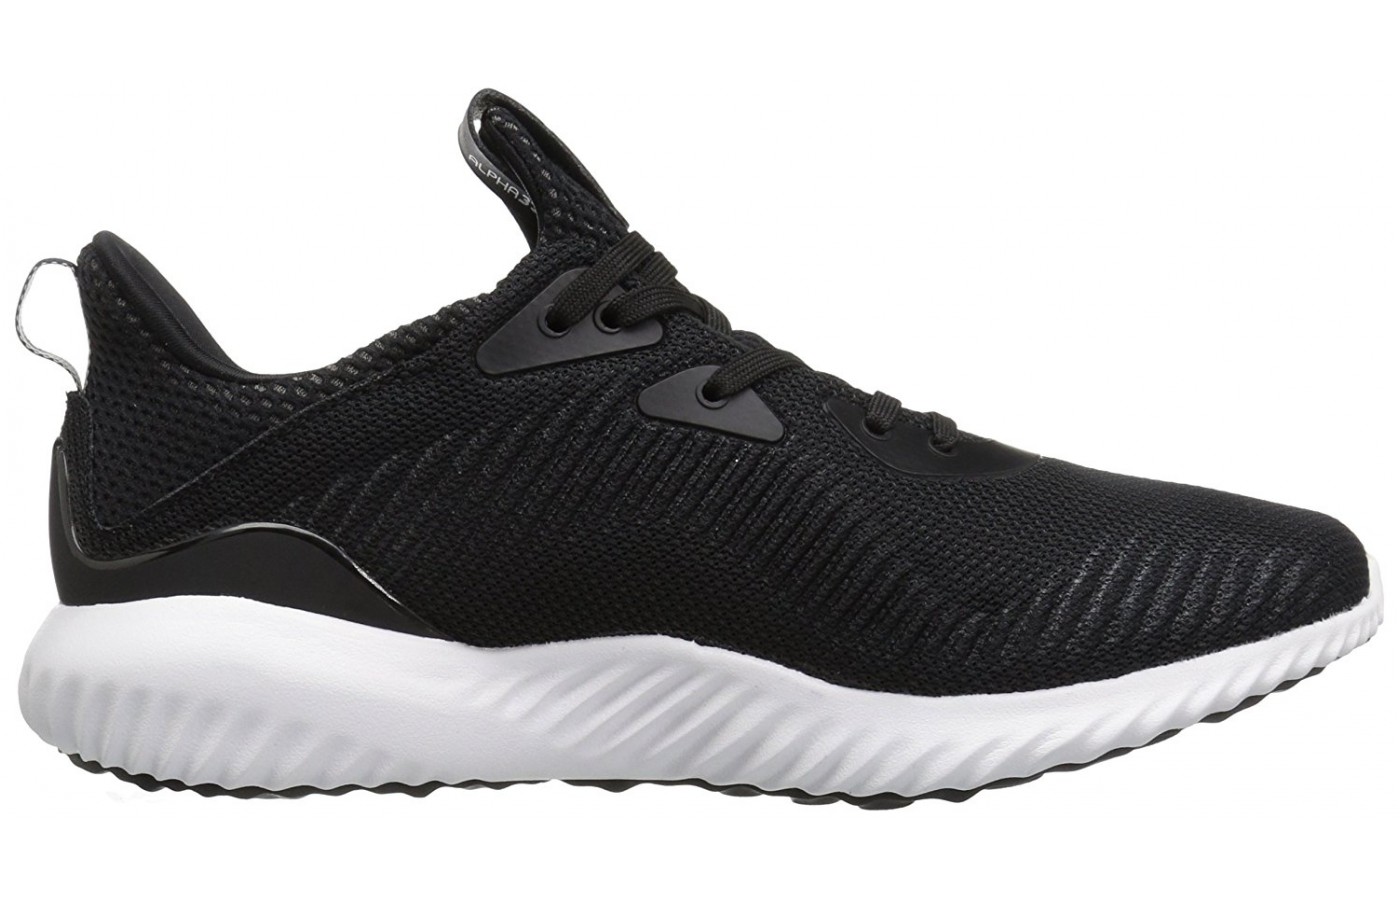 Adidas AlphaBounce Reviewed & Tested for Performance - WalkJogRun